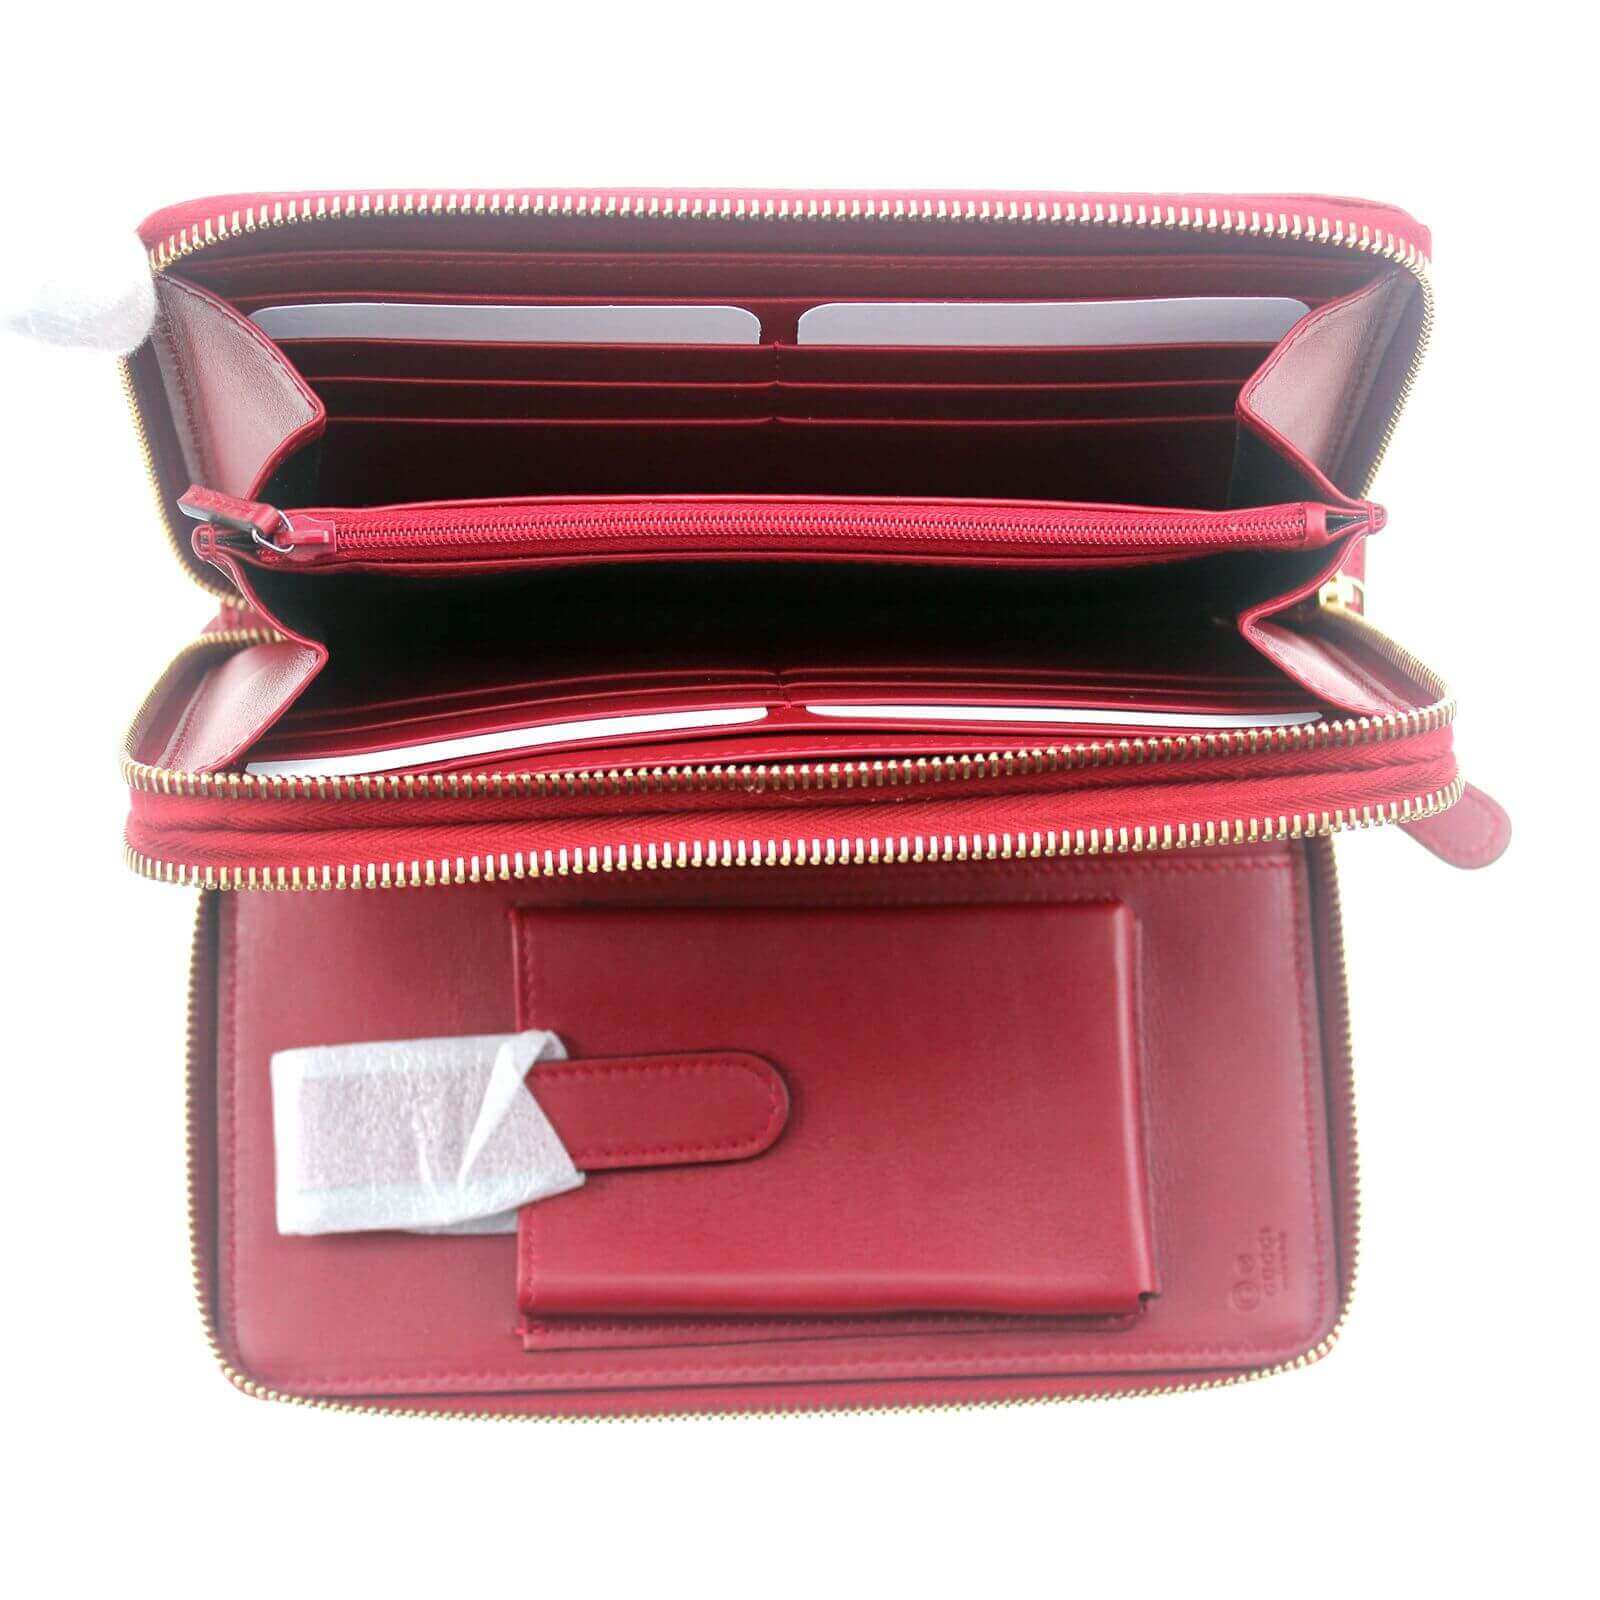 Double Zip Wallet with Side Pocket - Red